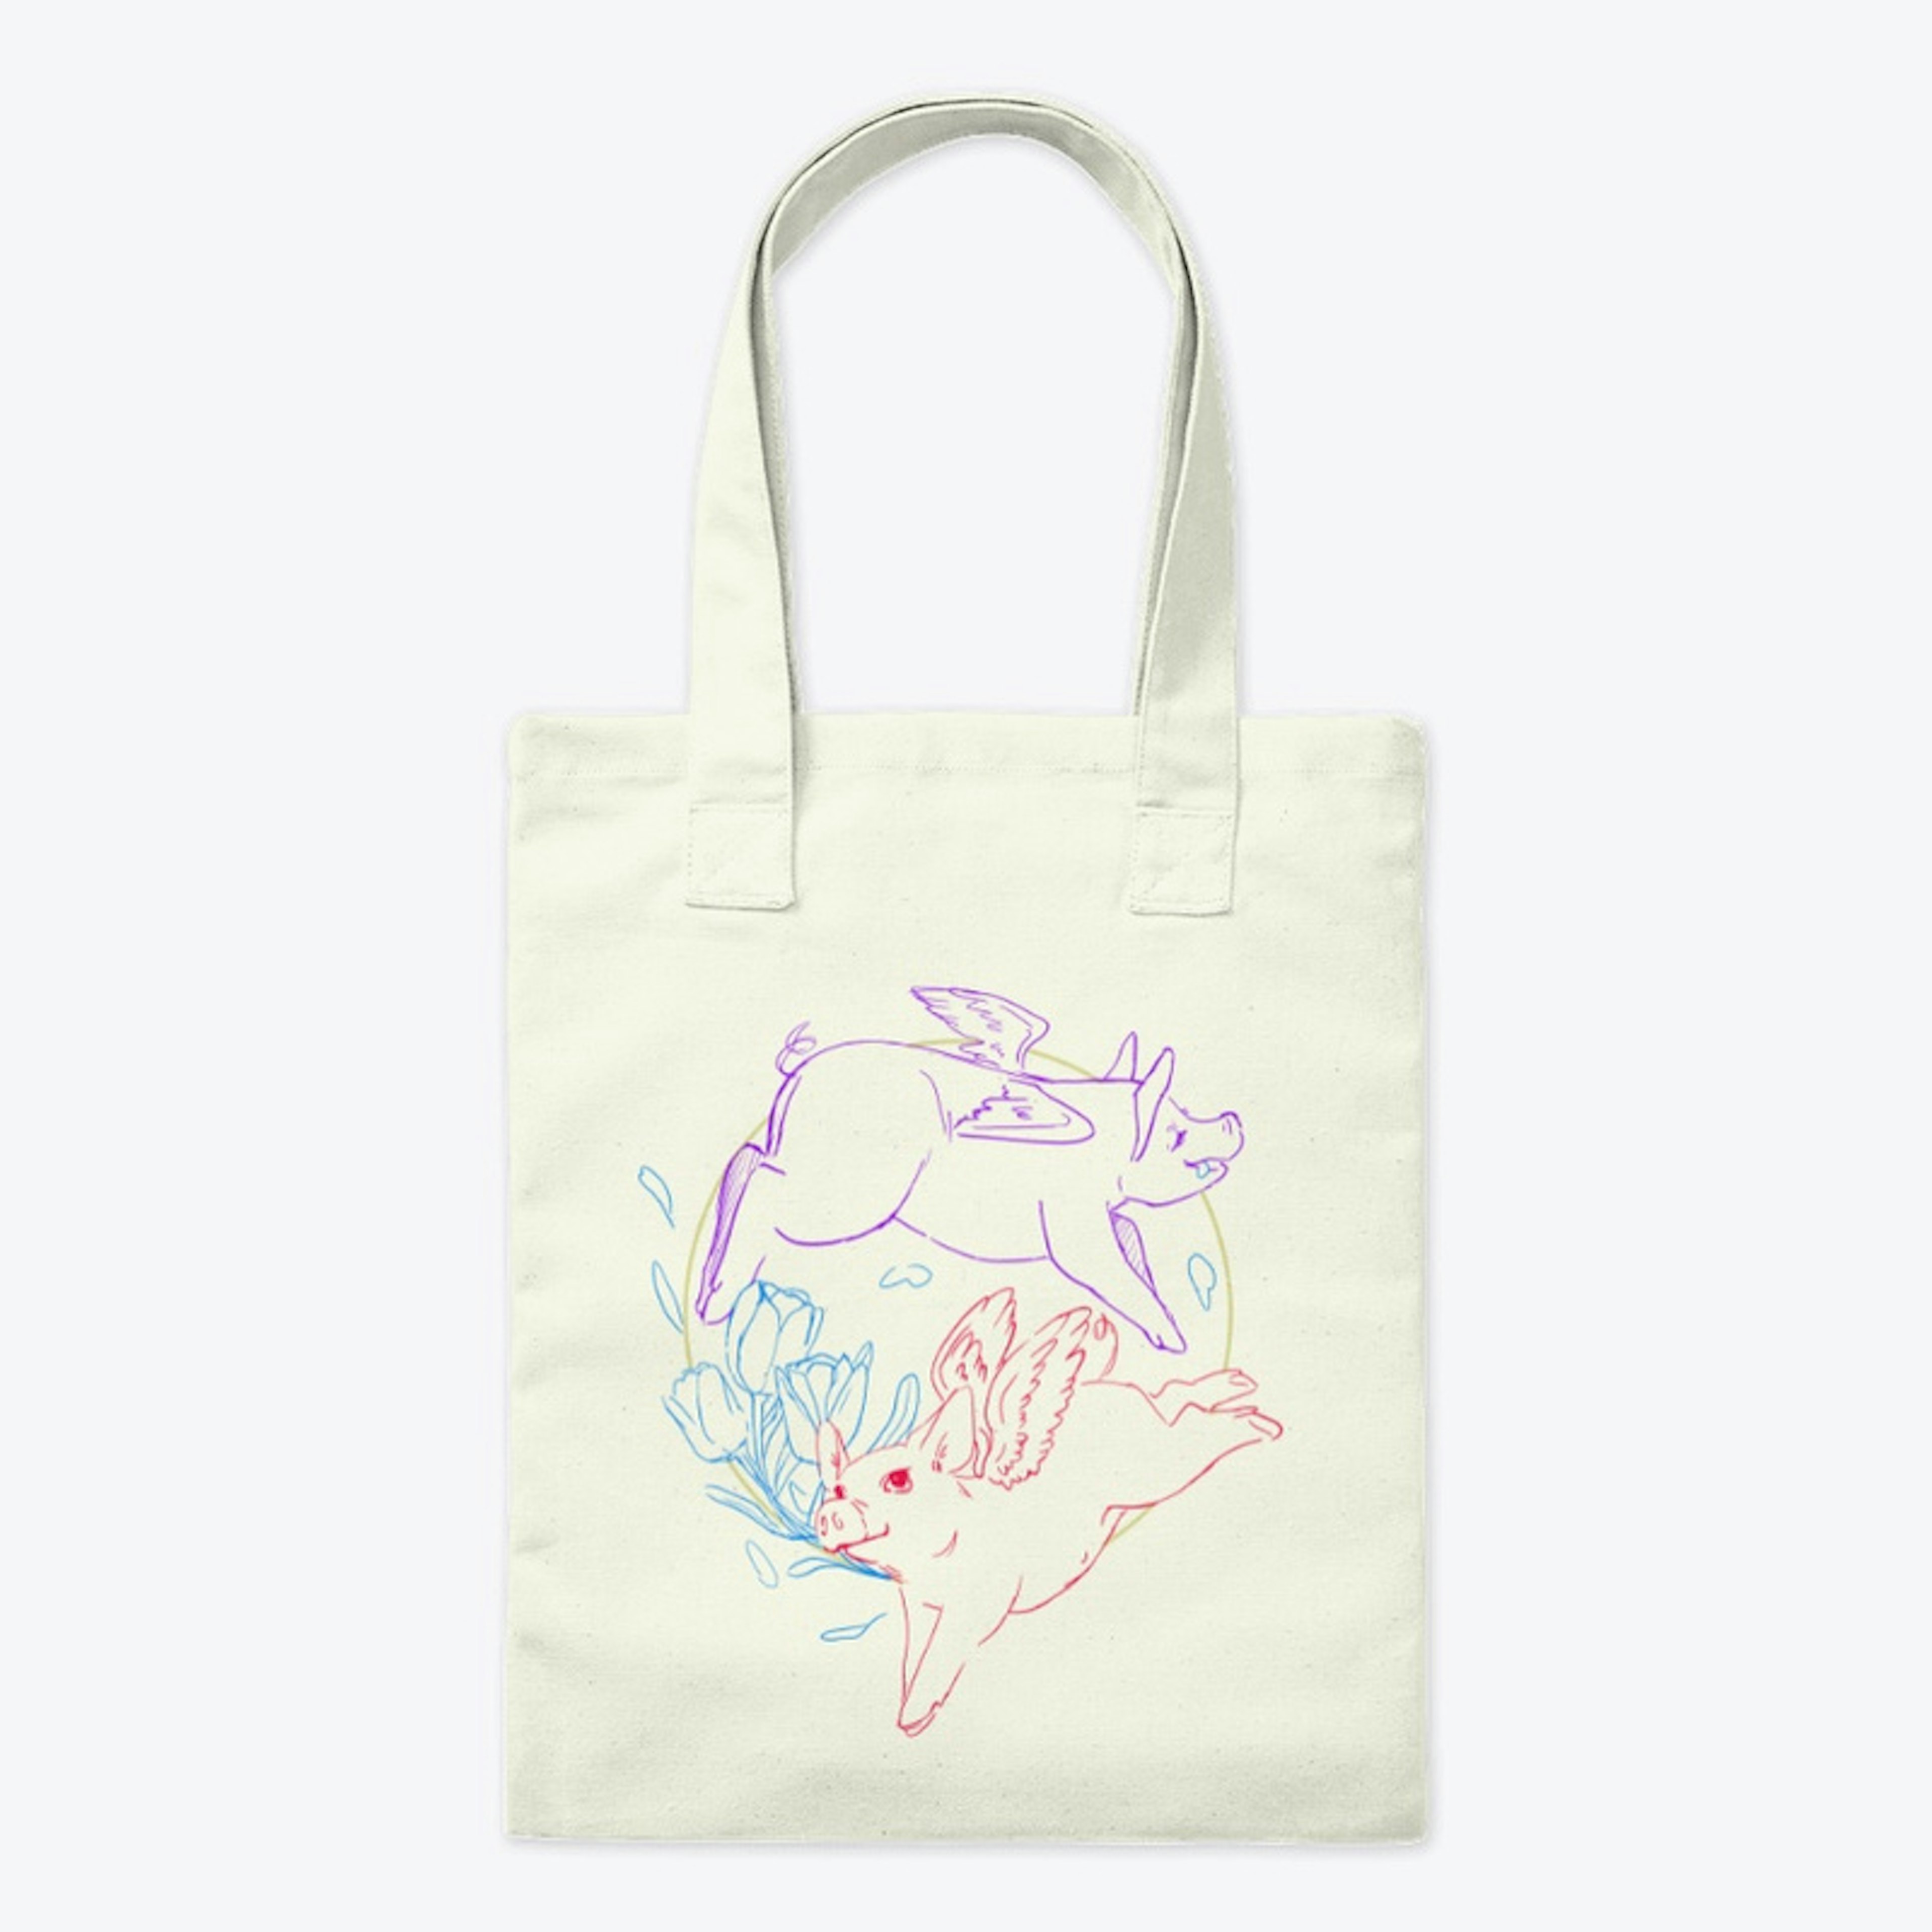 Pigs can fly Tote Bag